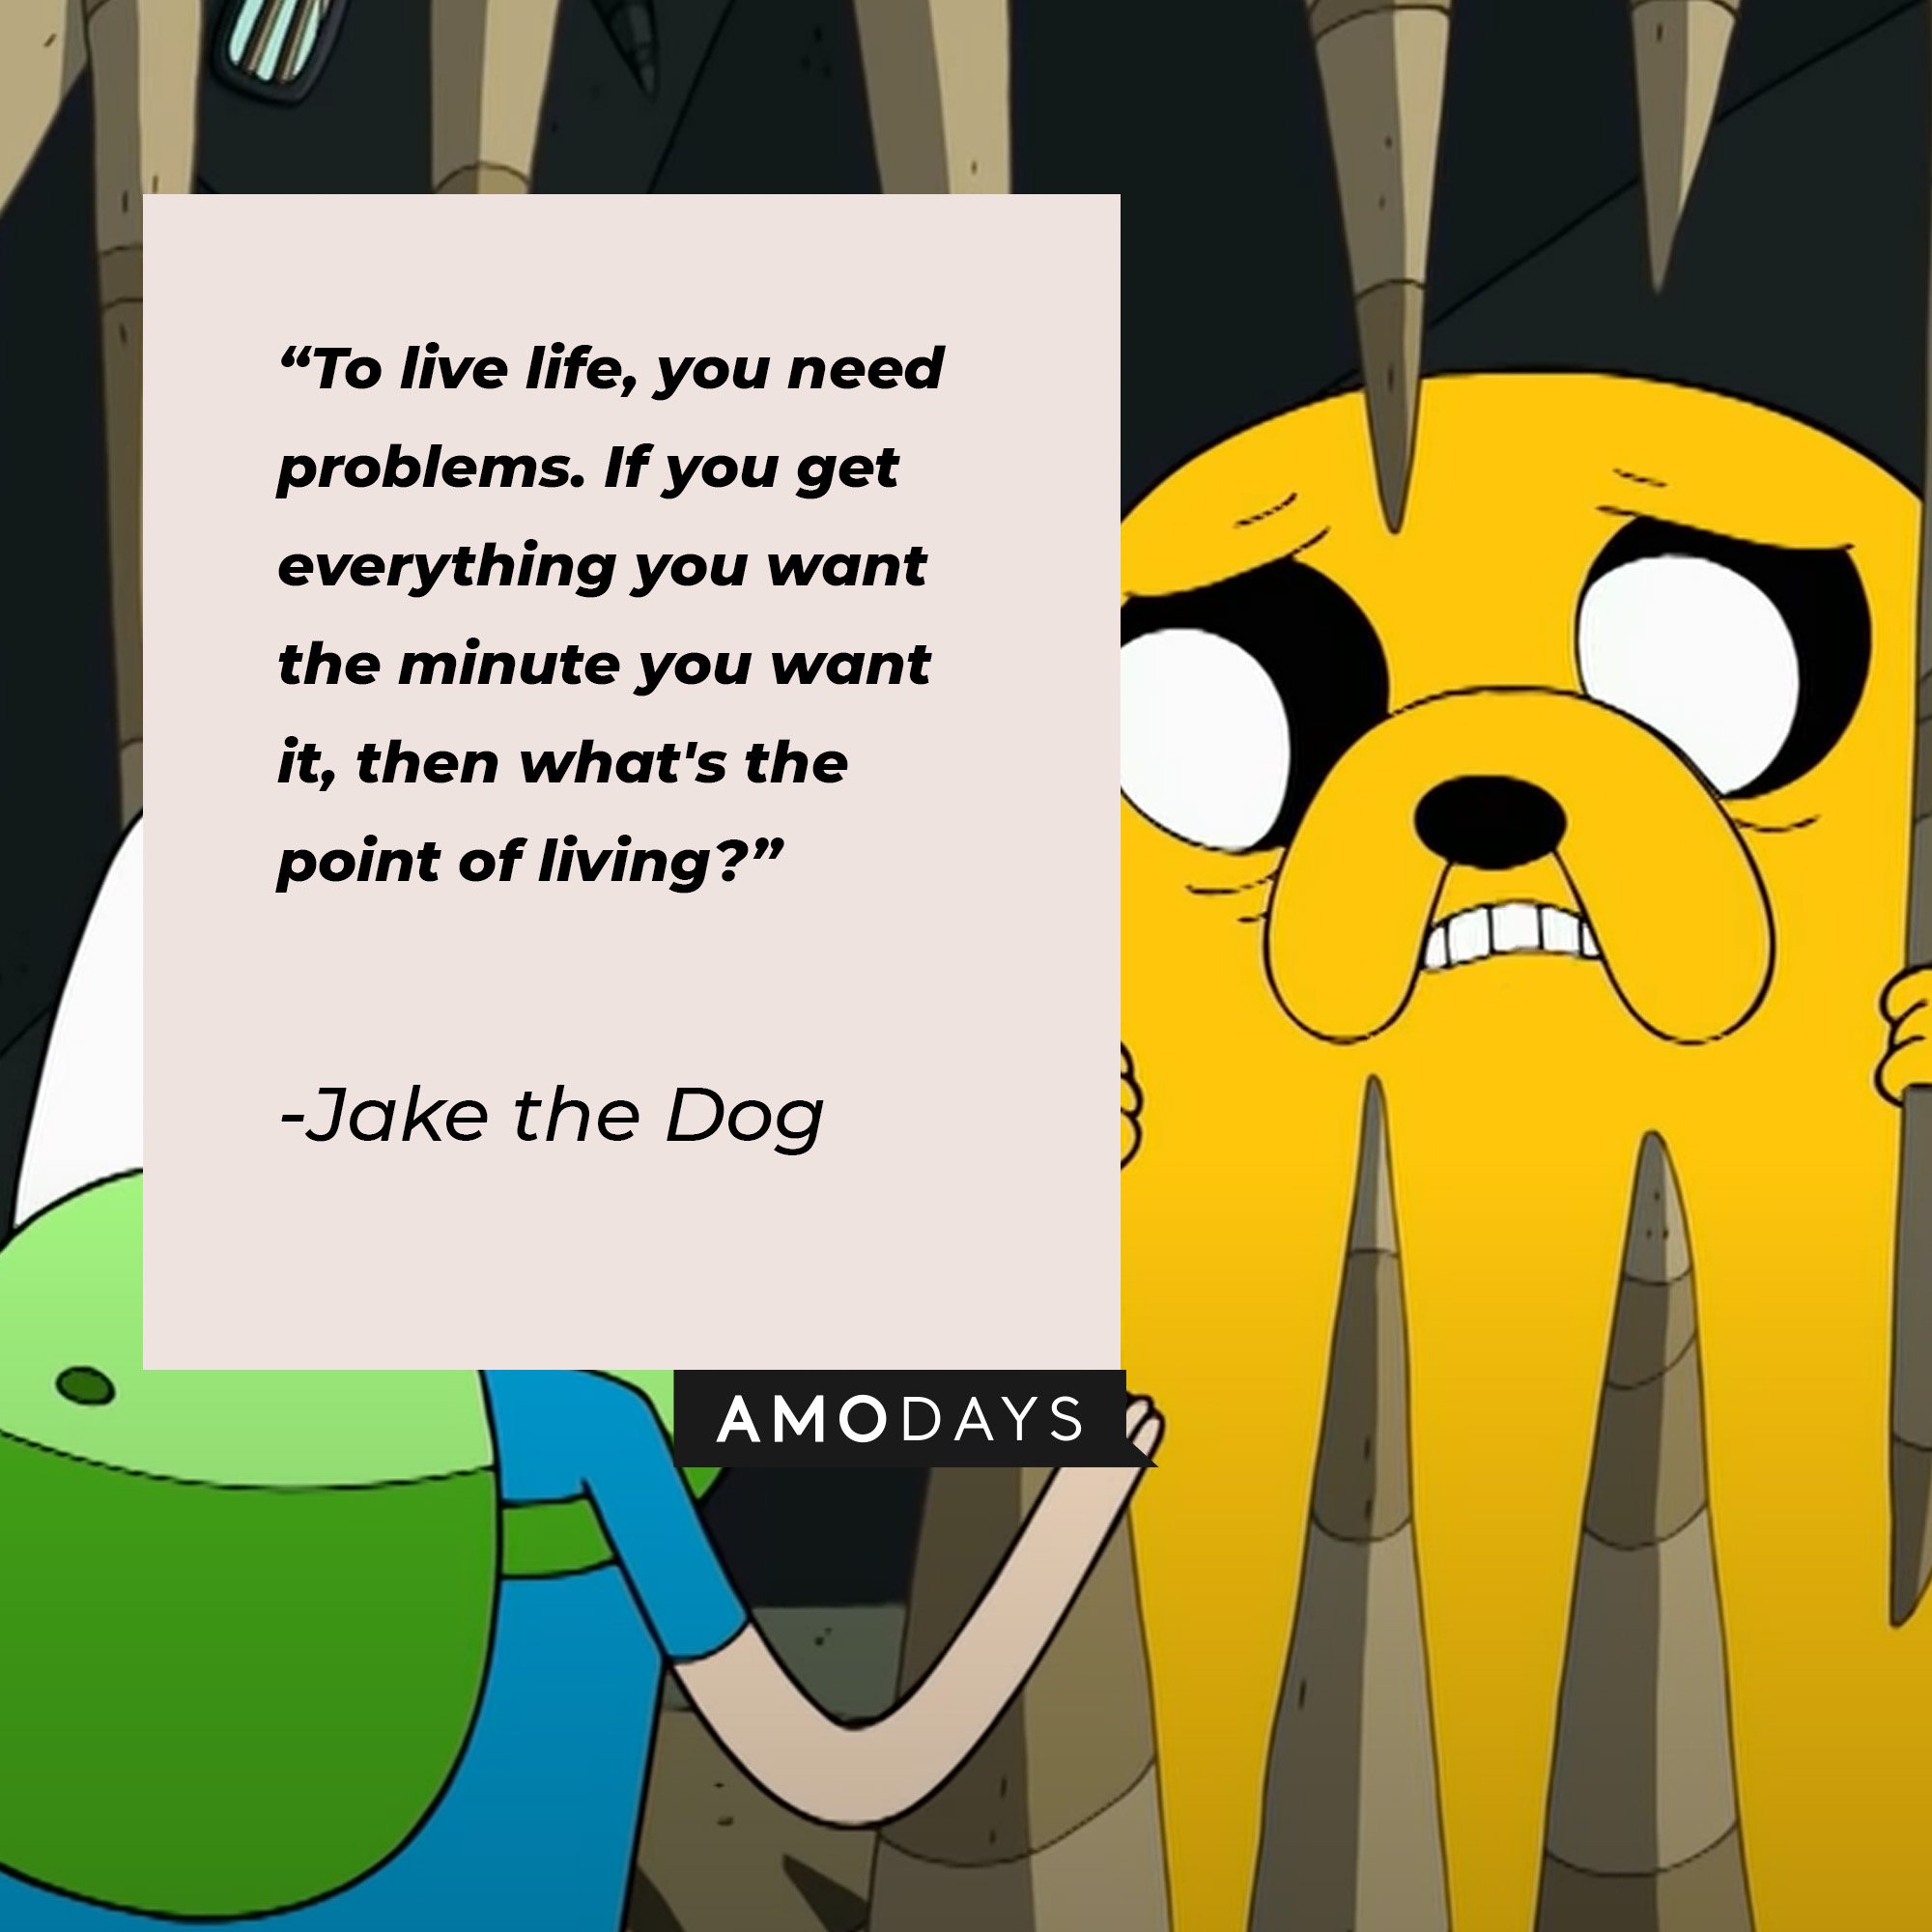 Jake the Dog's quote: "To live life, you need problems. If you get everything you want the minute you want it, then what's the point of living?" | Image: AmoDays